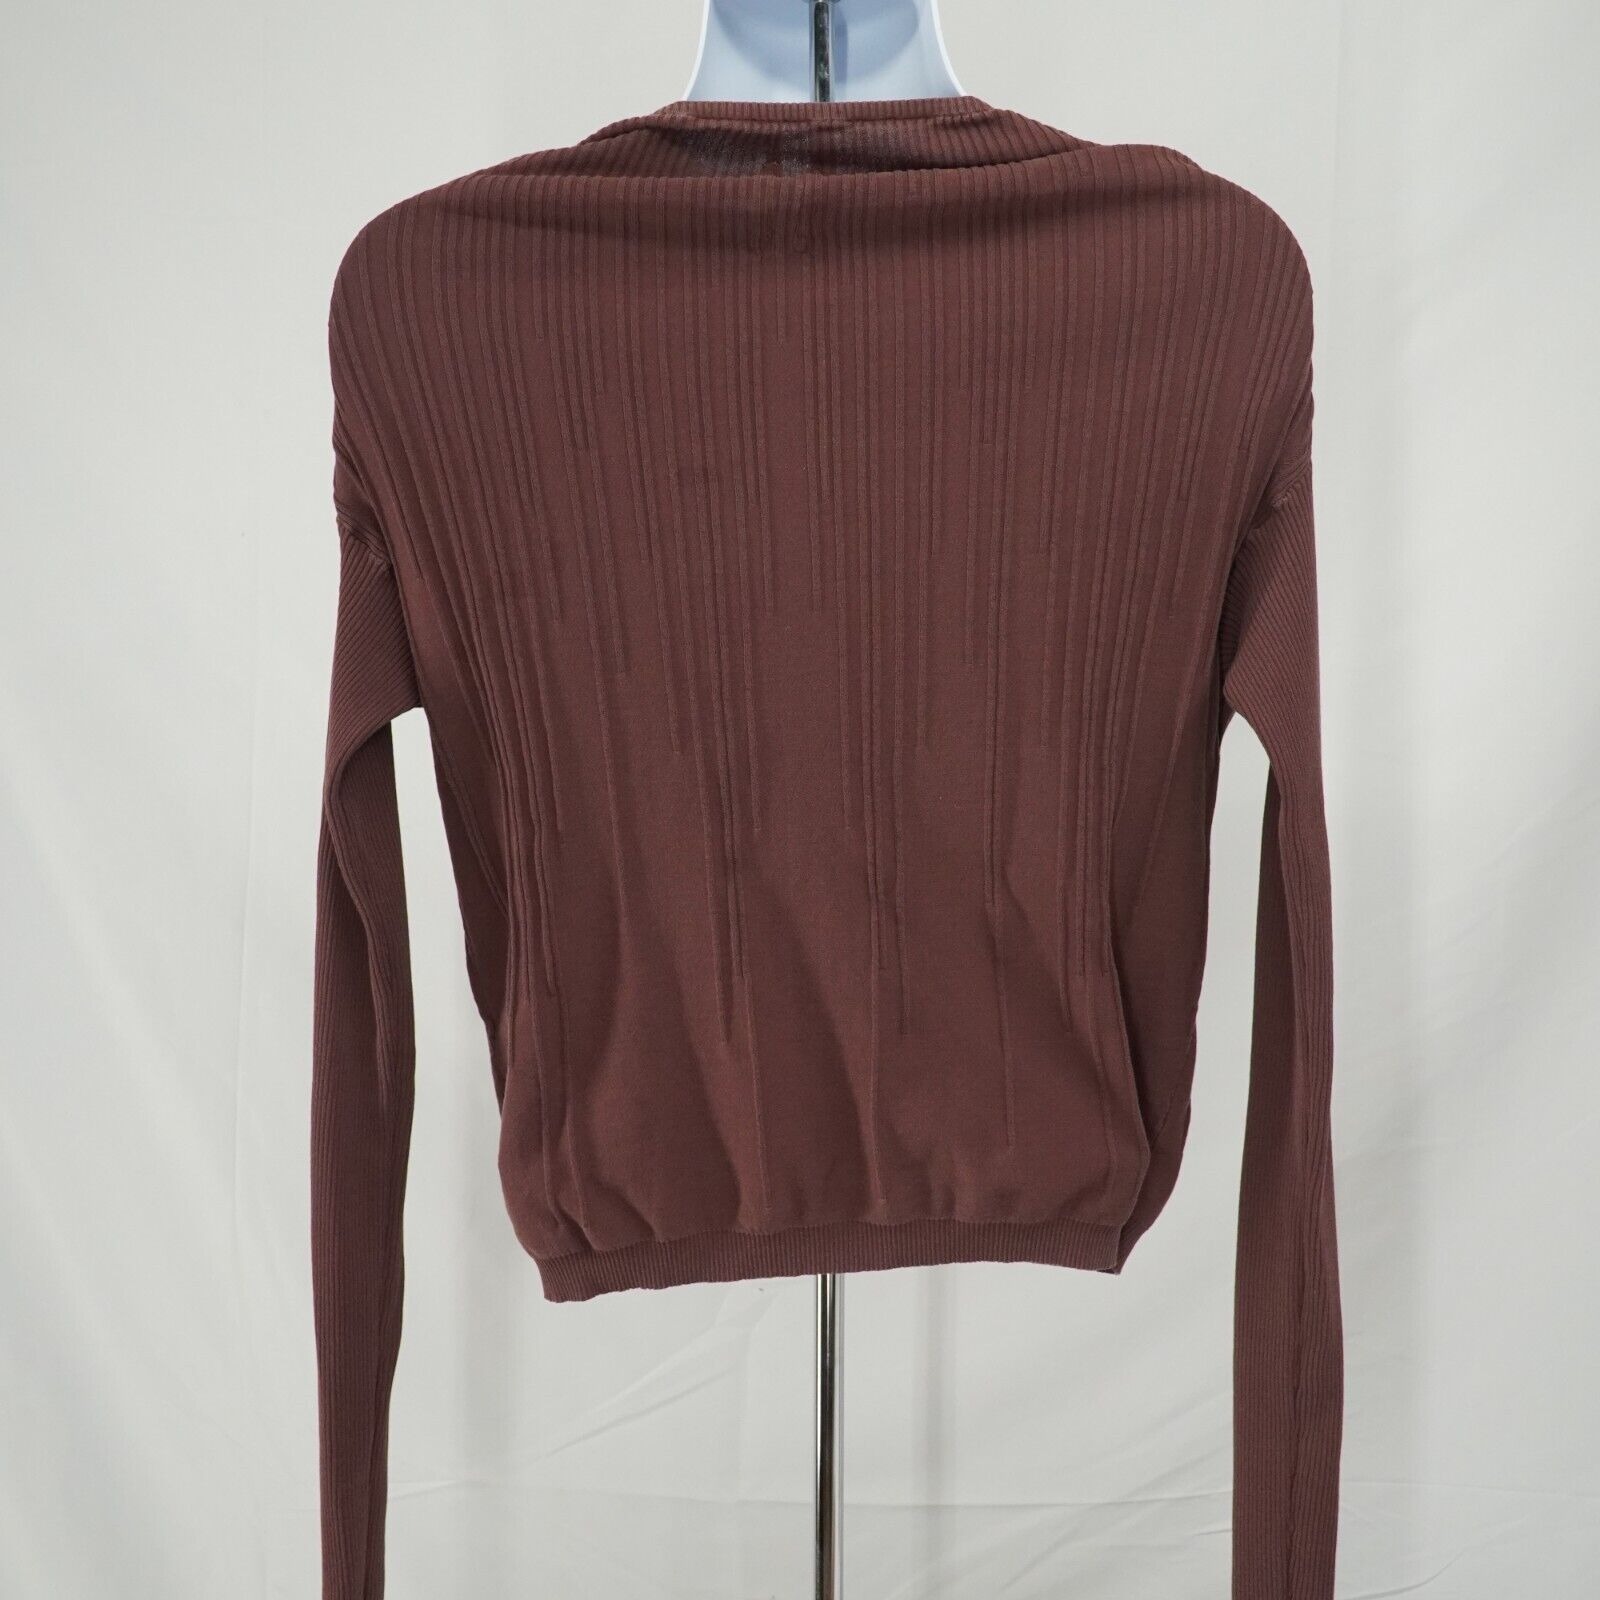 Ribbed Sweater SS17 Walrus Throat Burgundy Red - 10